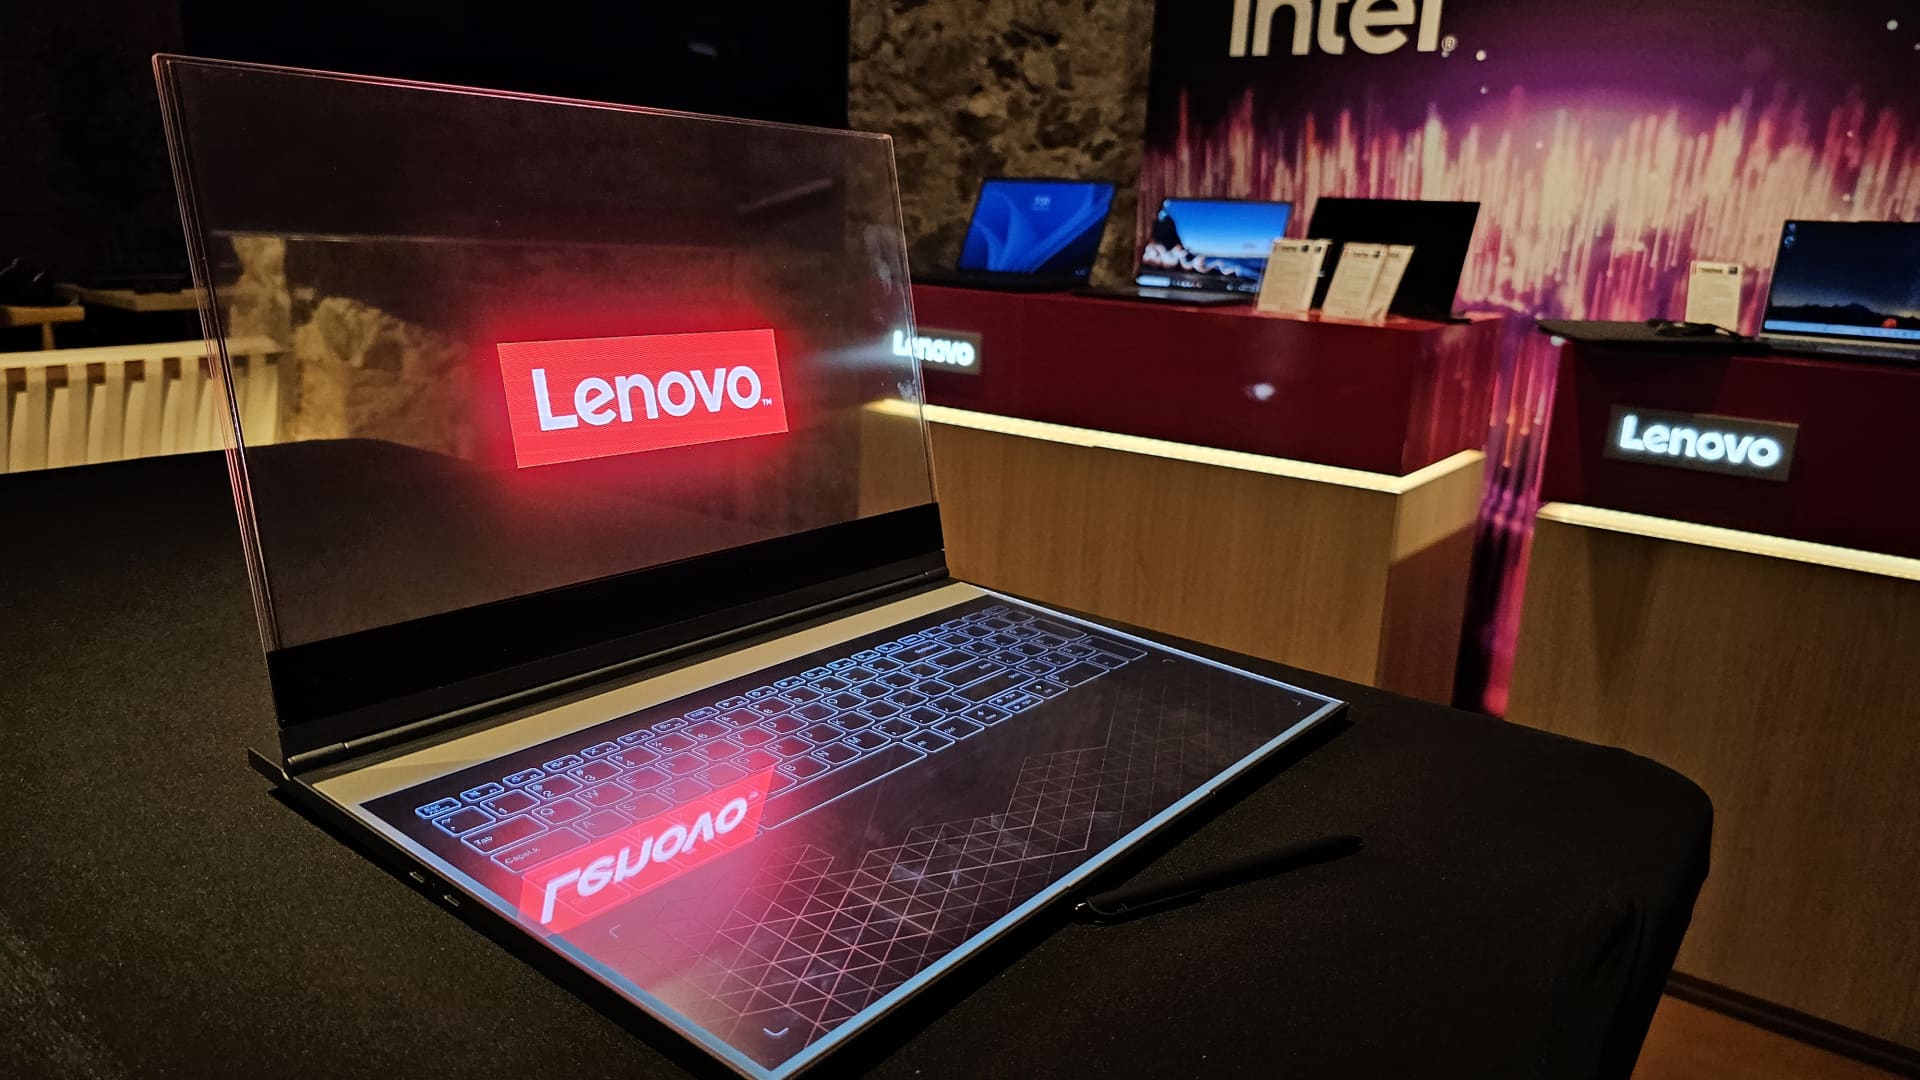 China's Lenovo shows off a laptop with a see-through screen